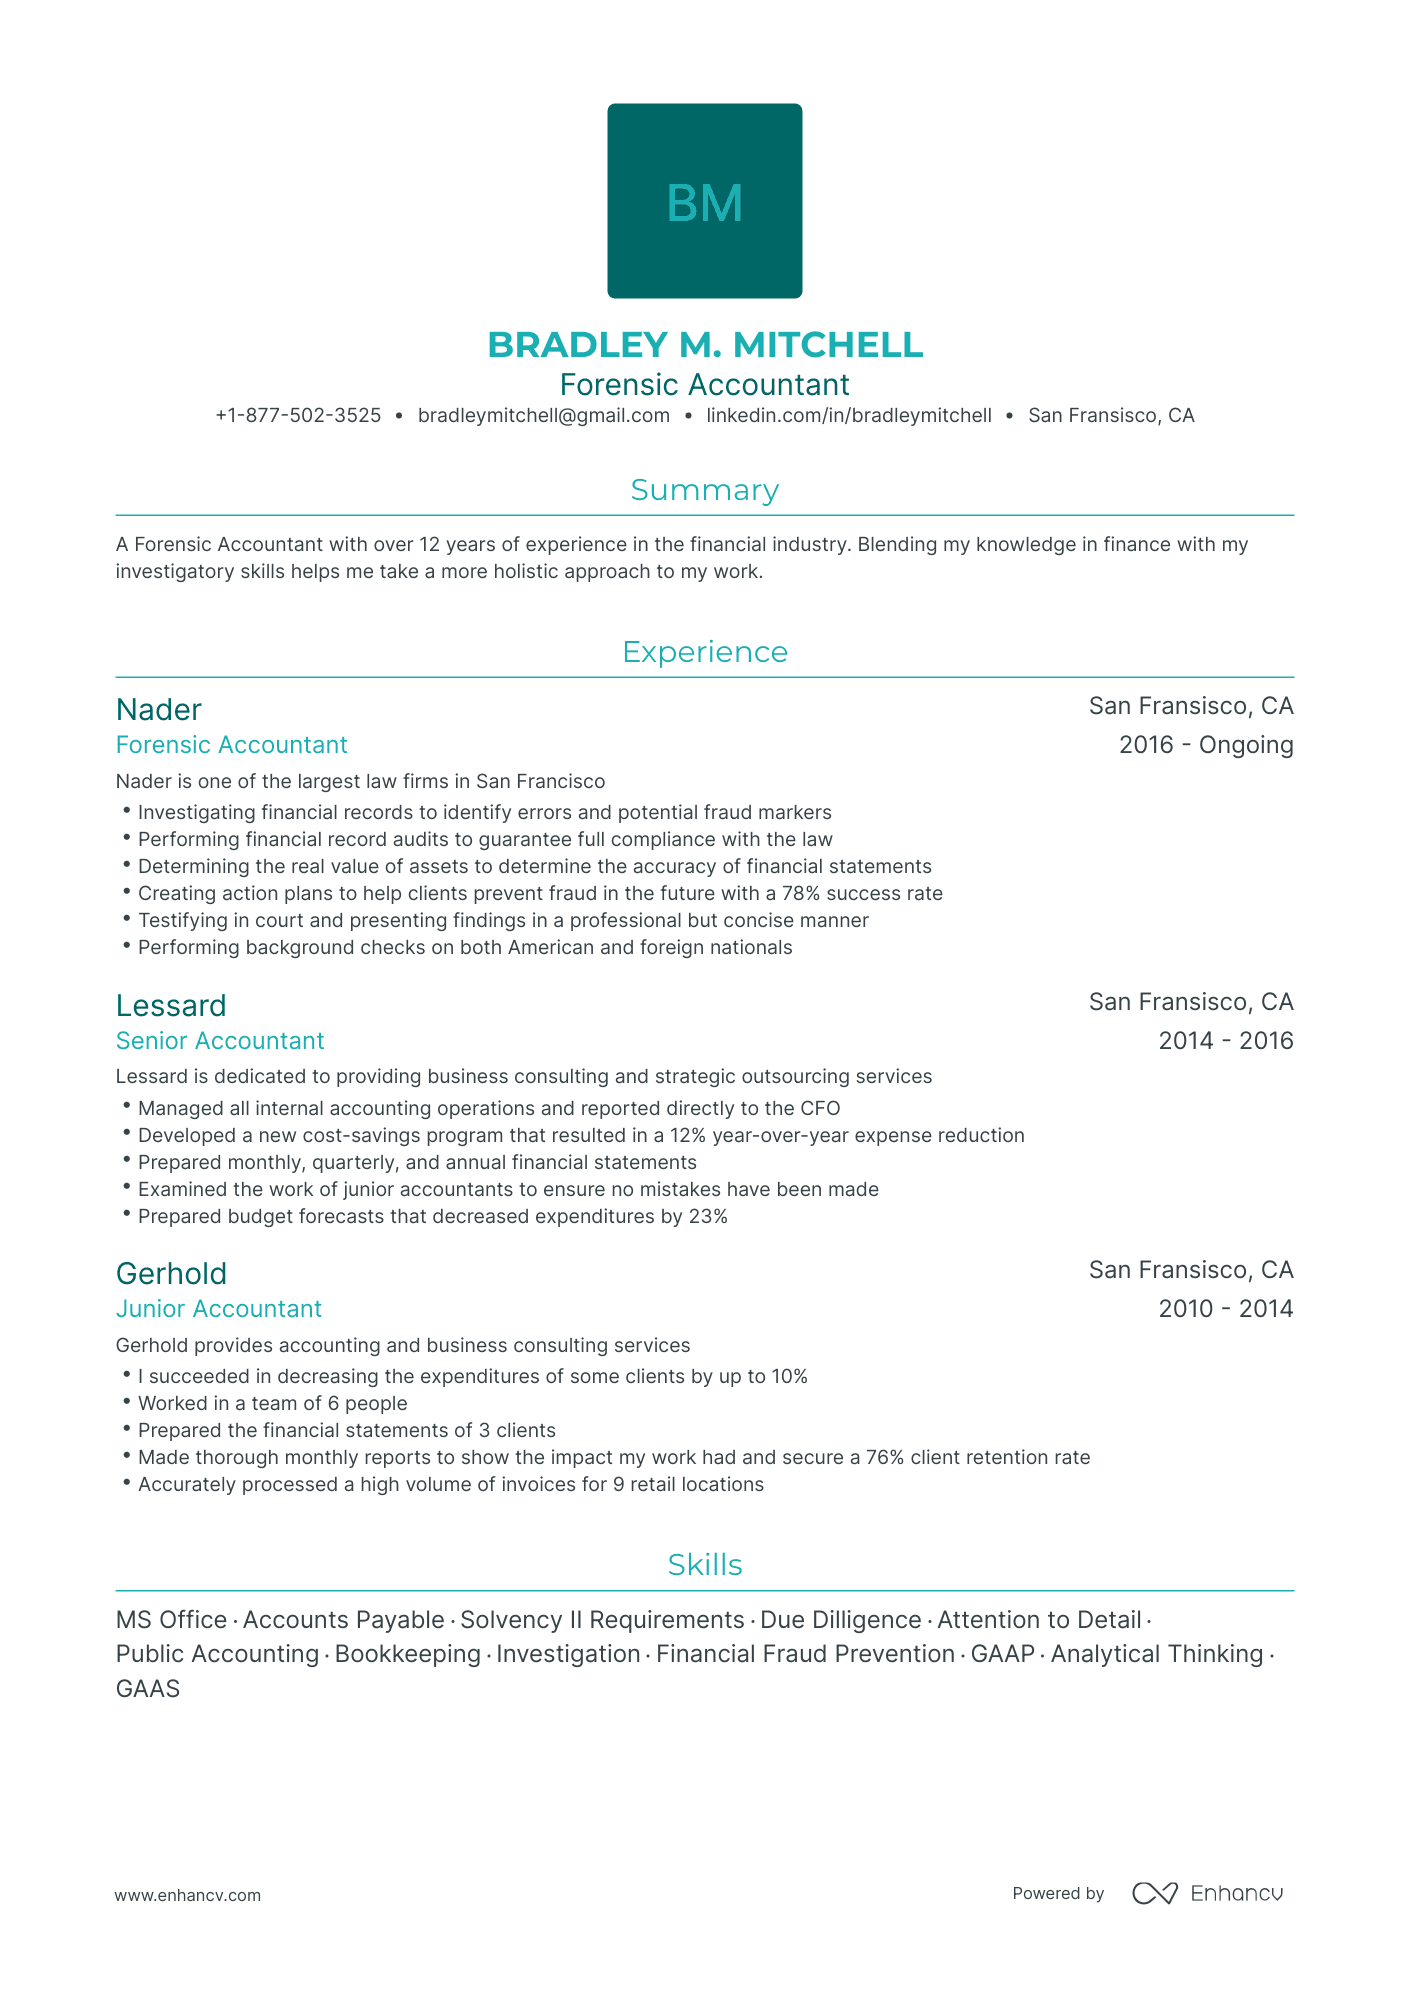 Traditional Forensic Accounting Resume Template